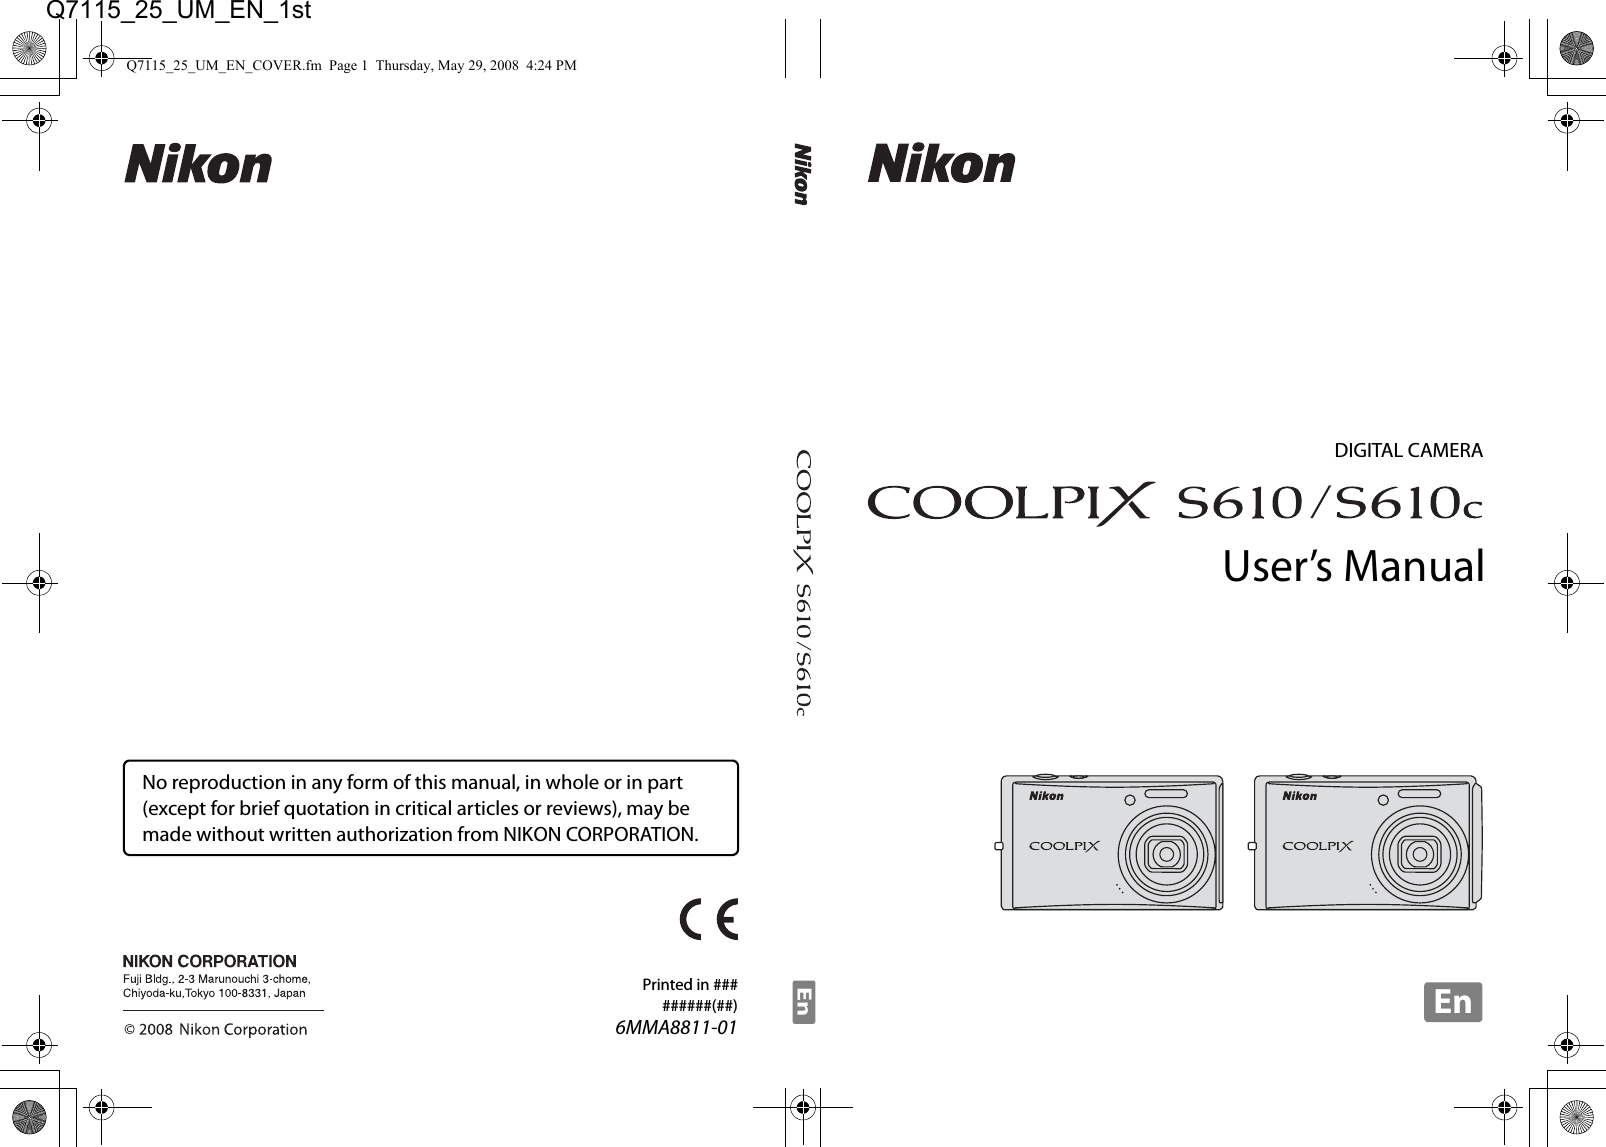 No reproduction in any form of this manual, in whole or in part (except for brief quotation in critical articles or reviews), may be made without written authorization from NIKON CORPORATION.Printed in #########(##)6MMA8811-01DIGITAL CAMERAUser’s ManualEnEnQ7115_25_UM_EN_COVER.fm  Page 1  Thursday, May 29, 2008  4:24 PMQ7115_25_UM_EN_1st